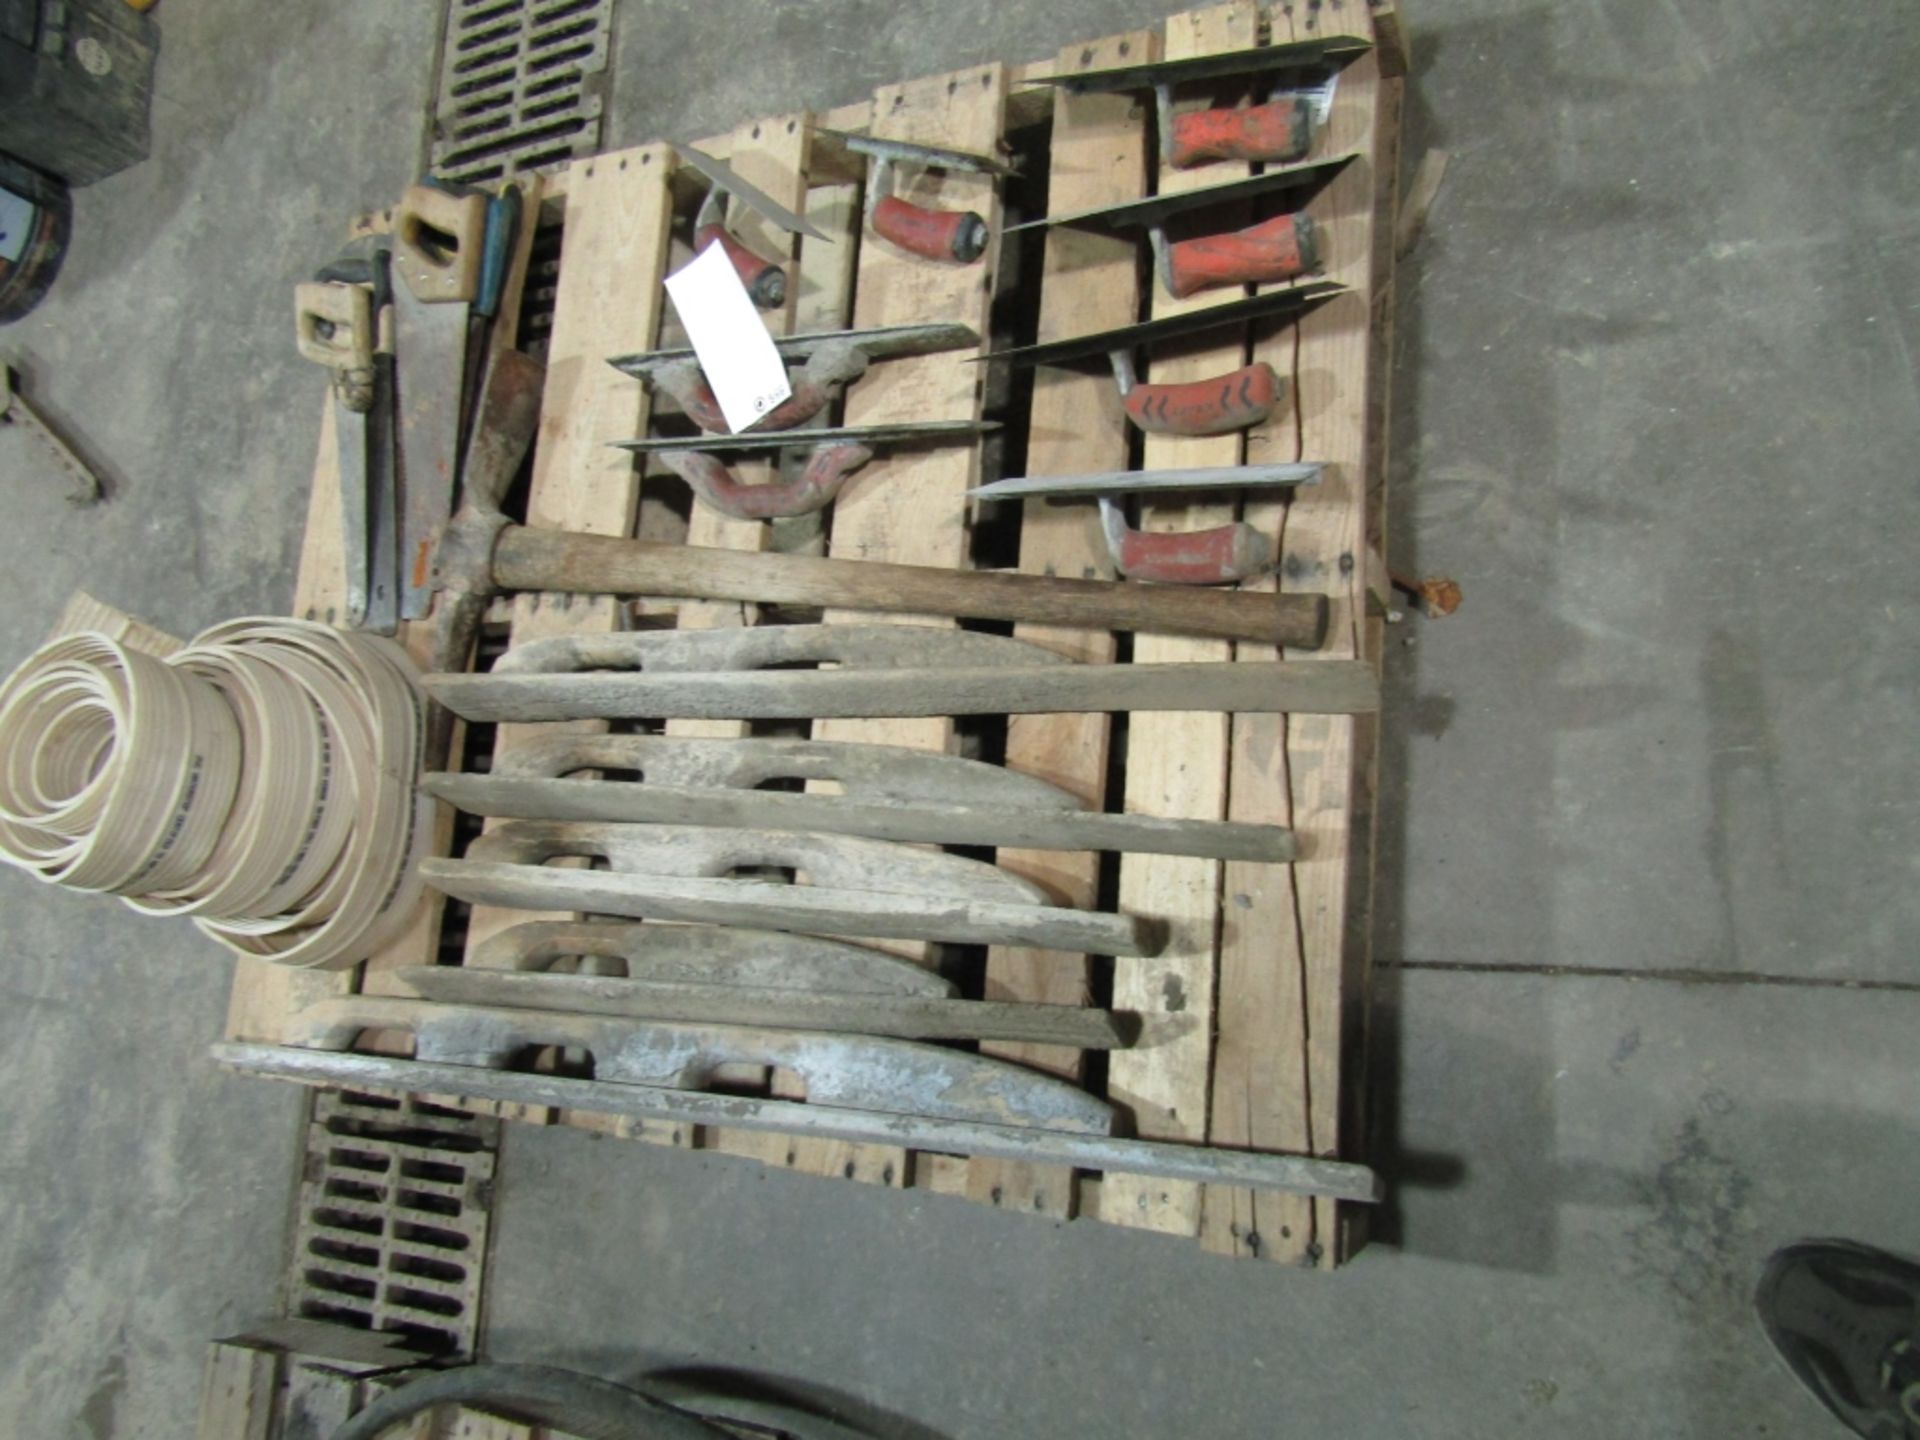 Pallet of Miscellaneous Hand Trowels, Axe, Saws, & Edging, Located in Winterset, IA - Image 7 of 7